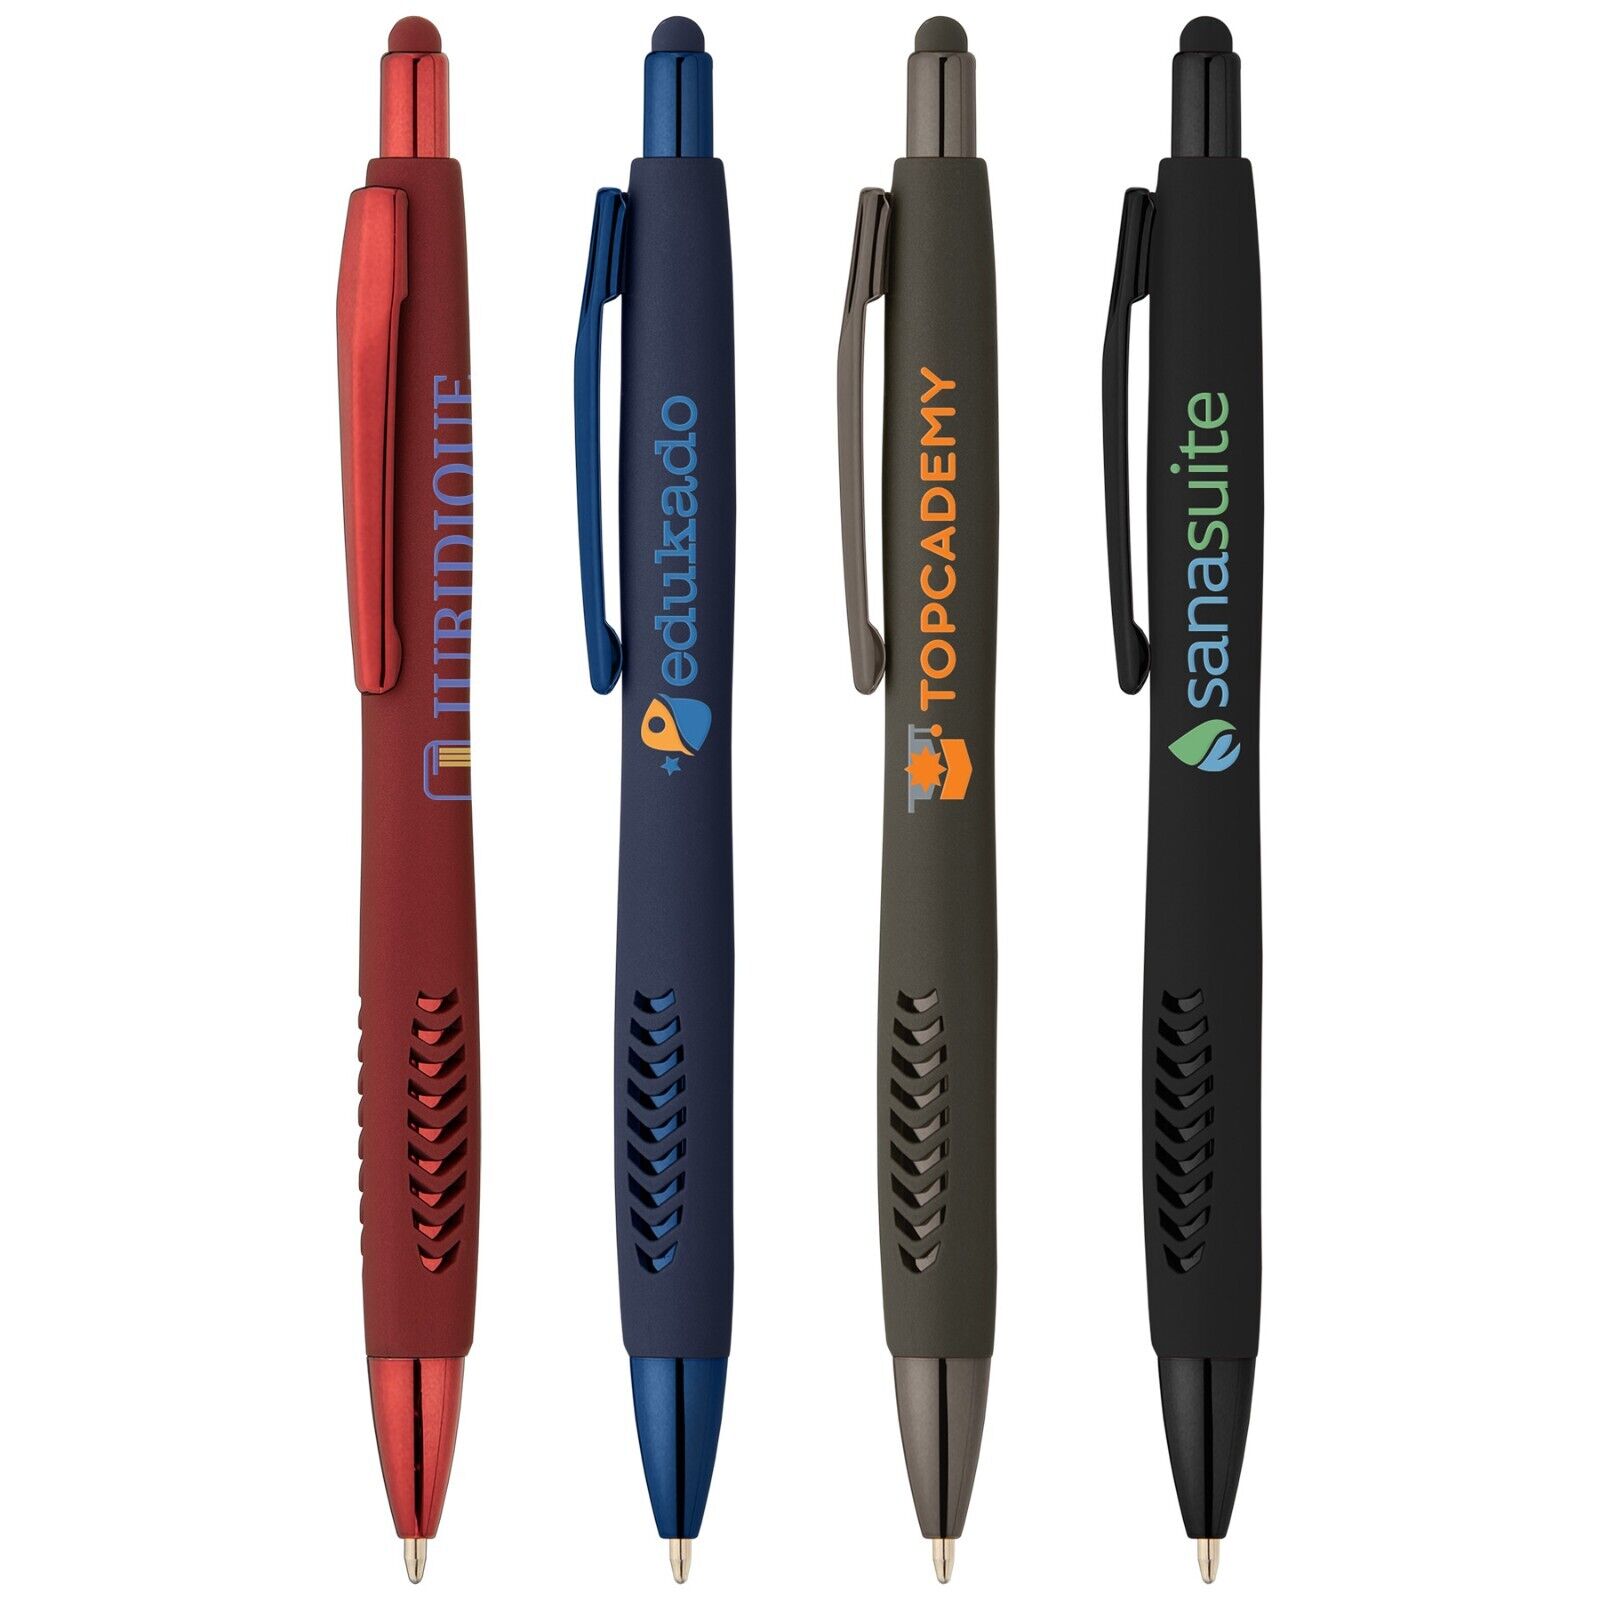 Promotional Avalon Softy Monochrome Classic Stylus Pen Printed in Full Color